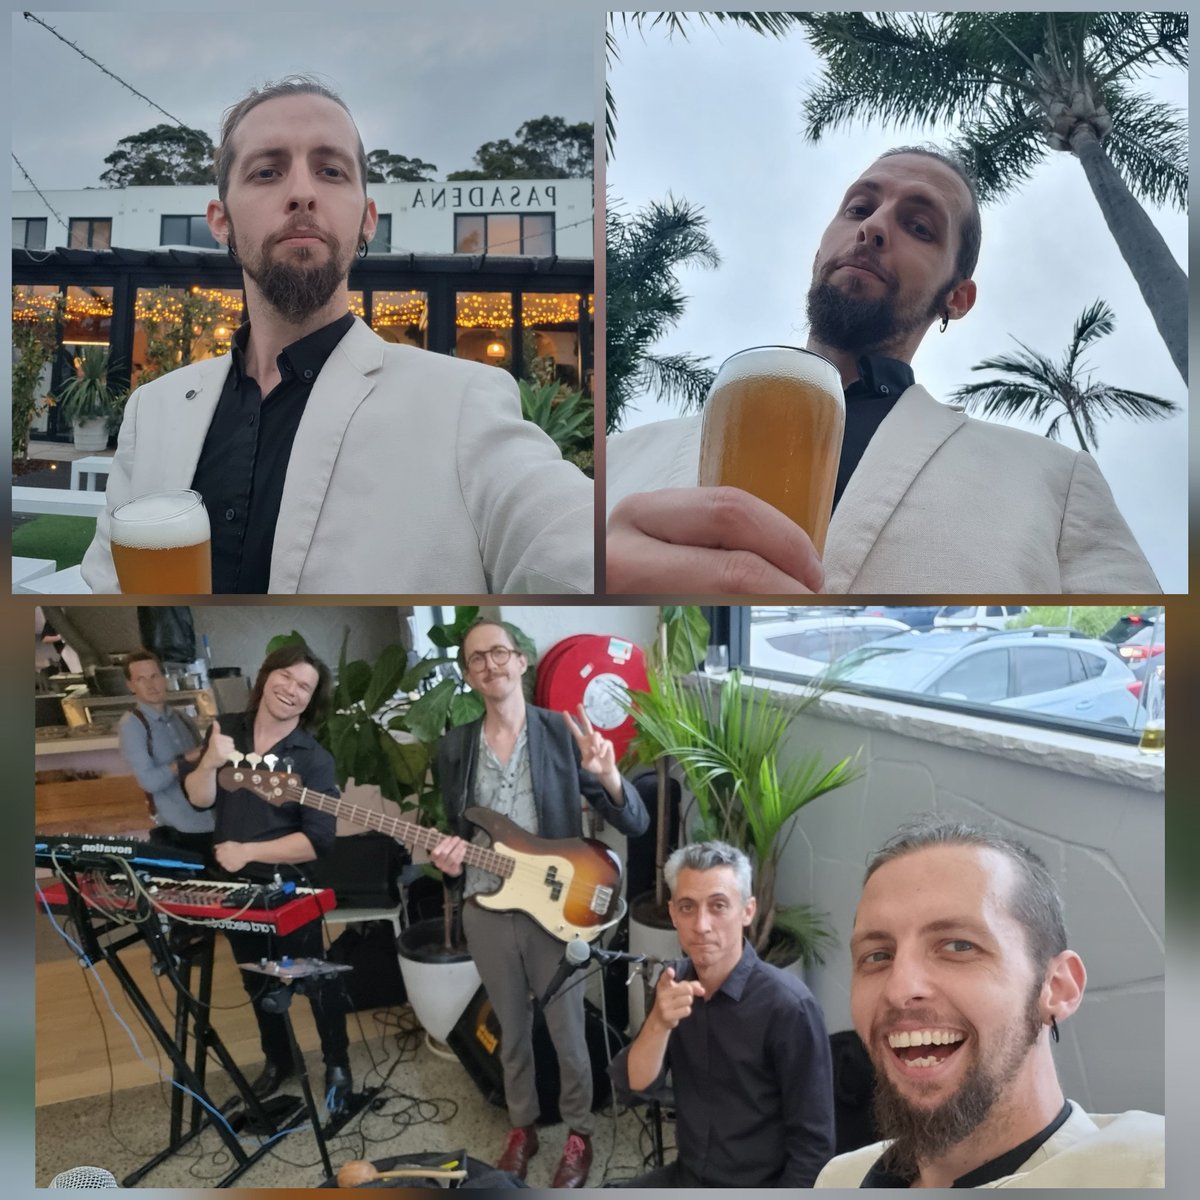 Should be illegal getting paid for this
*
*
*
#musician #wedding #band #gig #alexie #alexiepigot #livemusic #music #livemusic #sydneymusicscene #weddingband #singer #sydneysinger #sydneyweddingsinger #beautifullocation #vocalist #sydneyvocalist #bakerboysband #sydneyweddingband